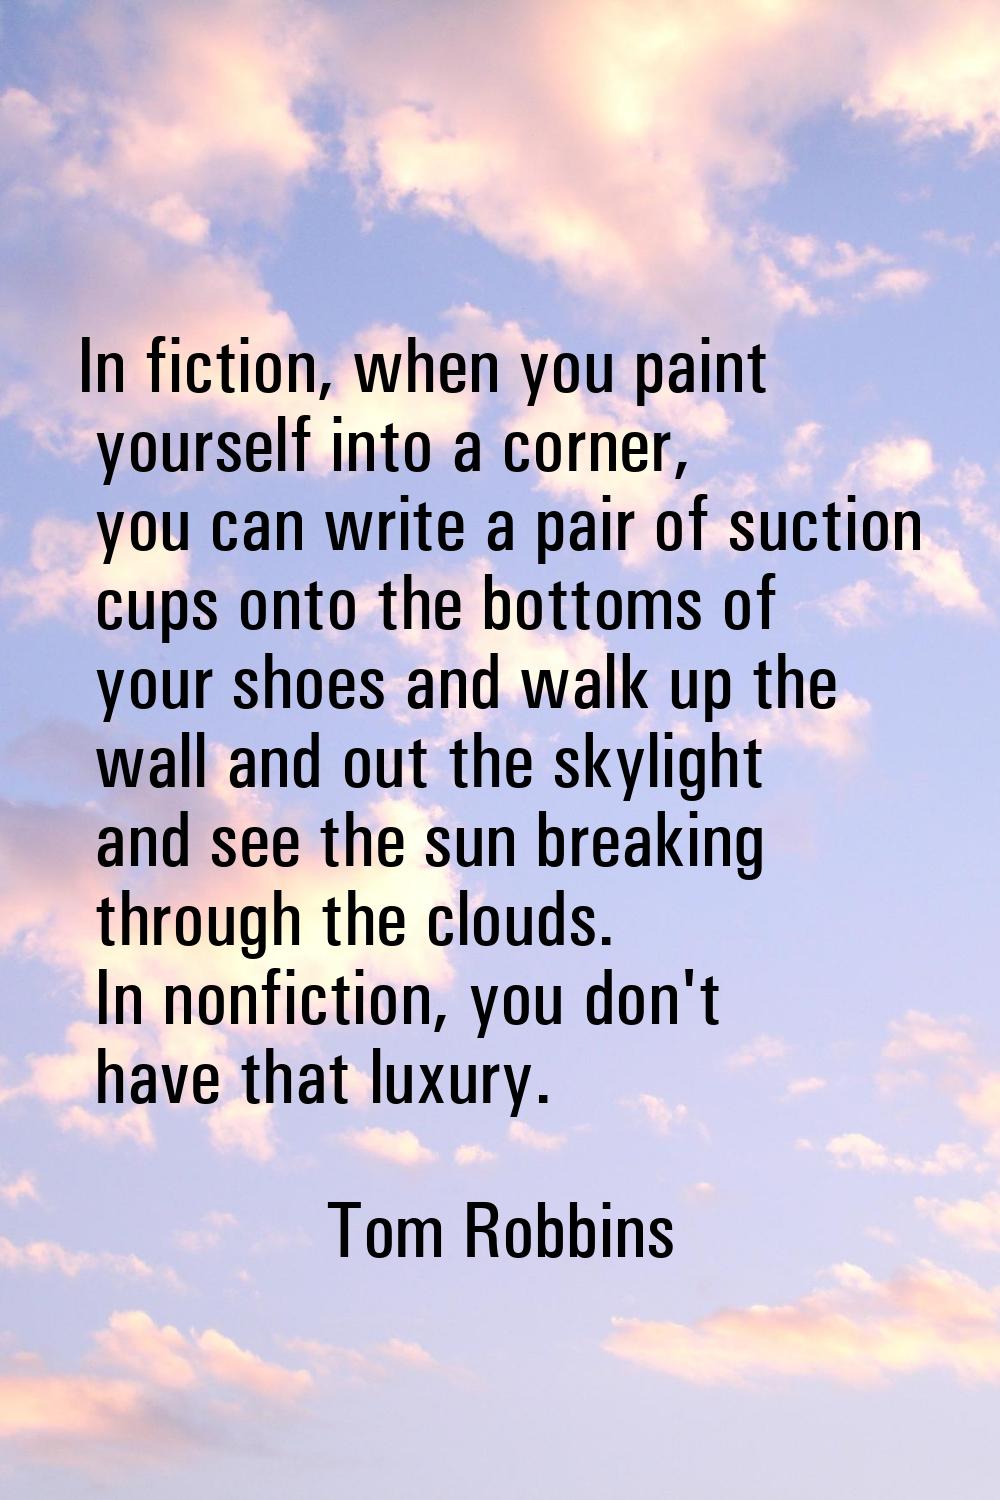 In fiction, when you paint yourself into a corner, you can write a pair of suction cups onto the bo